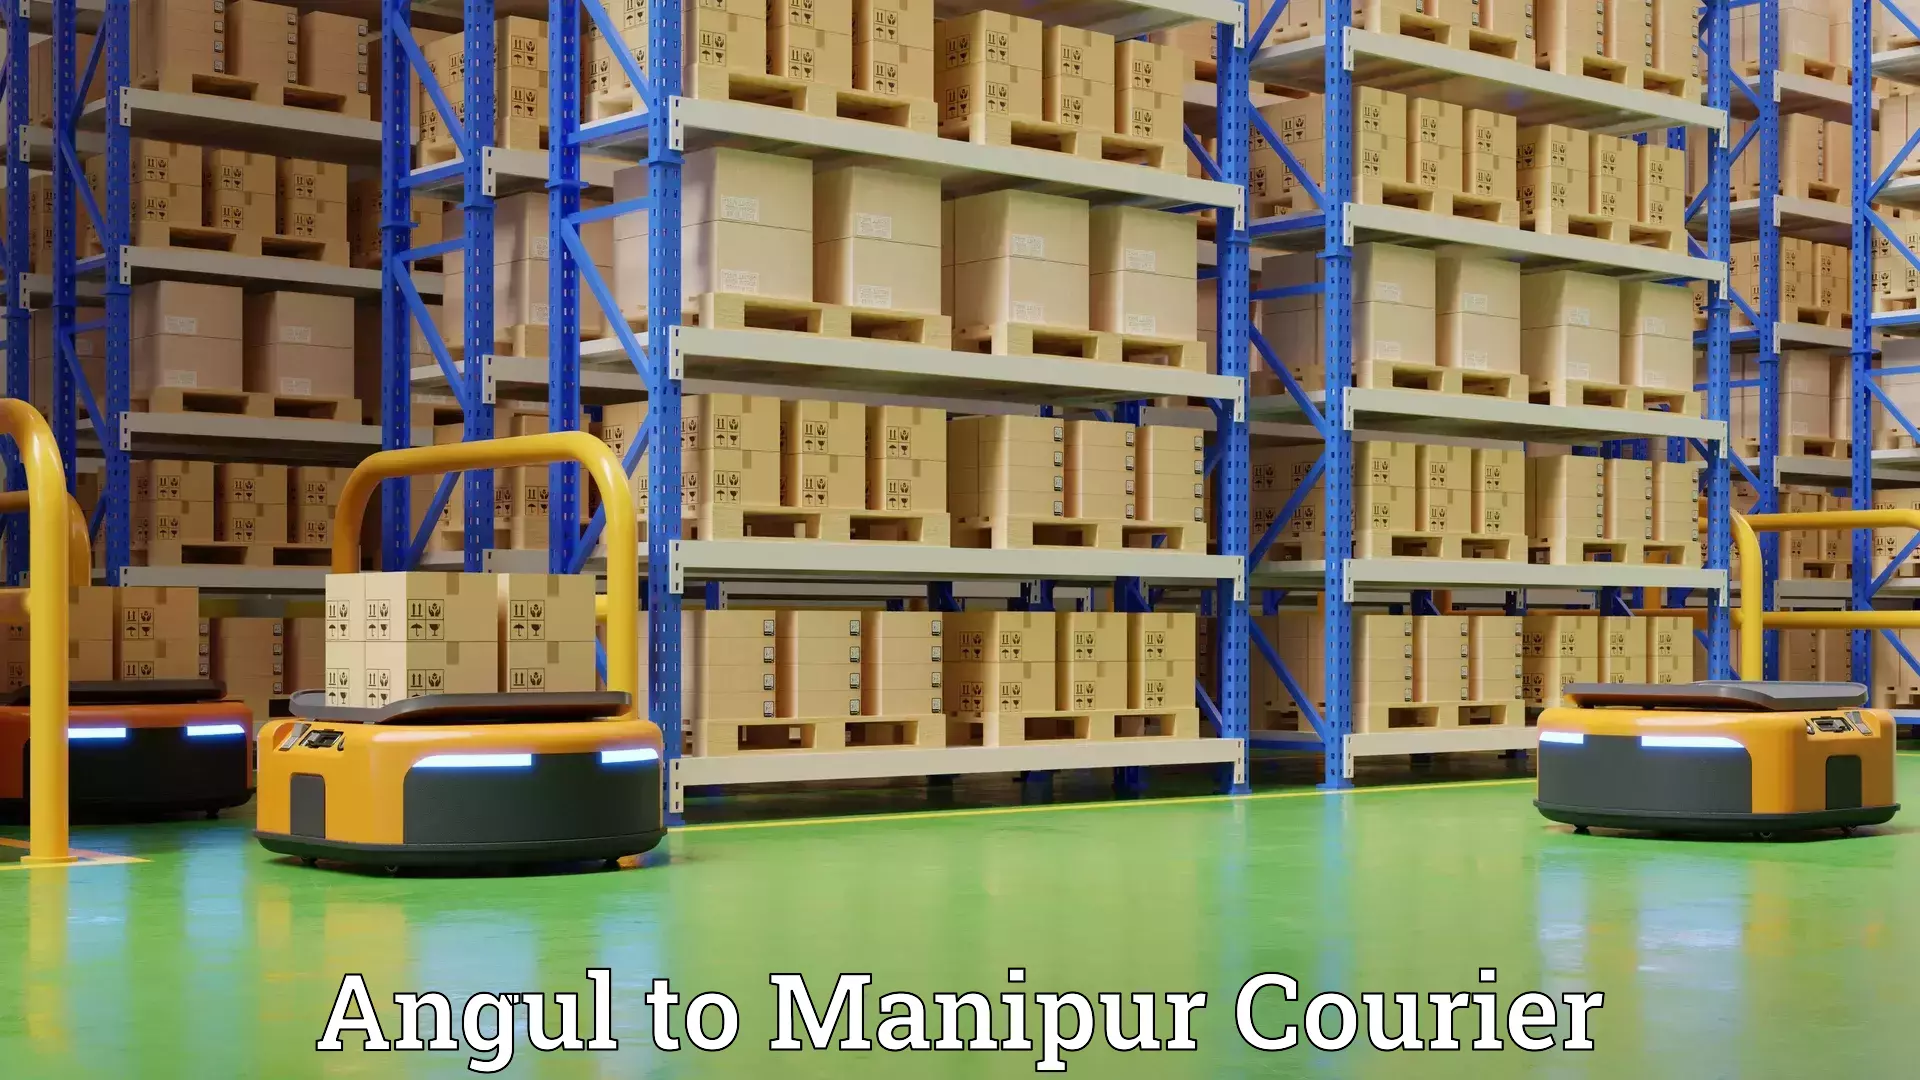 Full-service movers Angul to Manipur